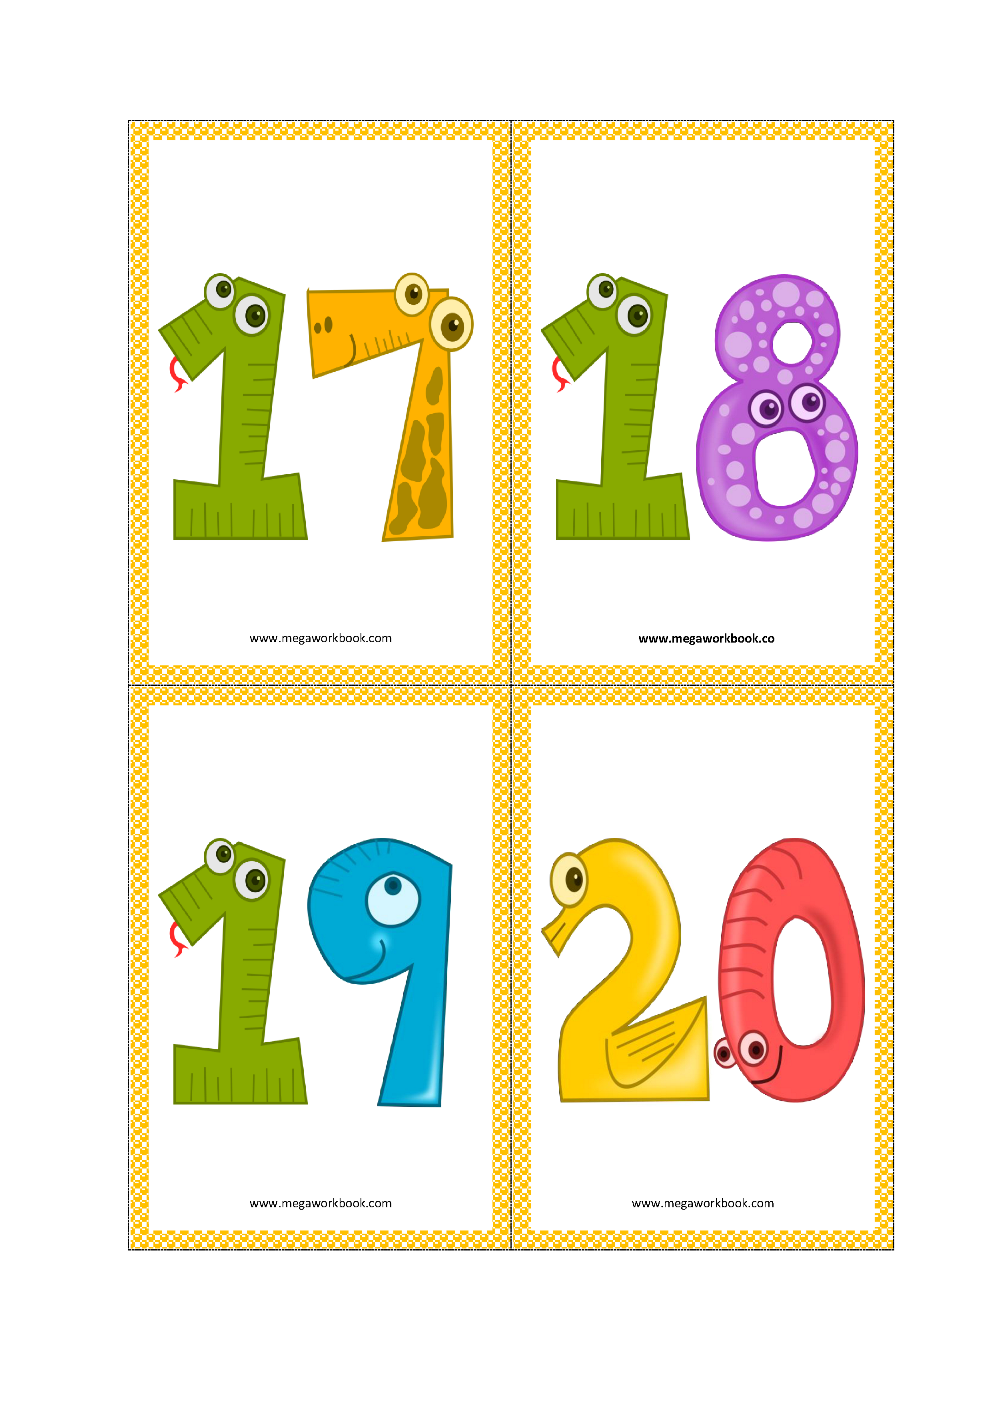 colored-printable-numbers-1-10-number-wall-cards-for-preschoolers-with-colorful-pencil